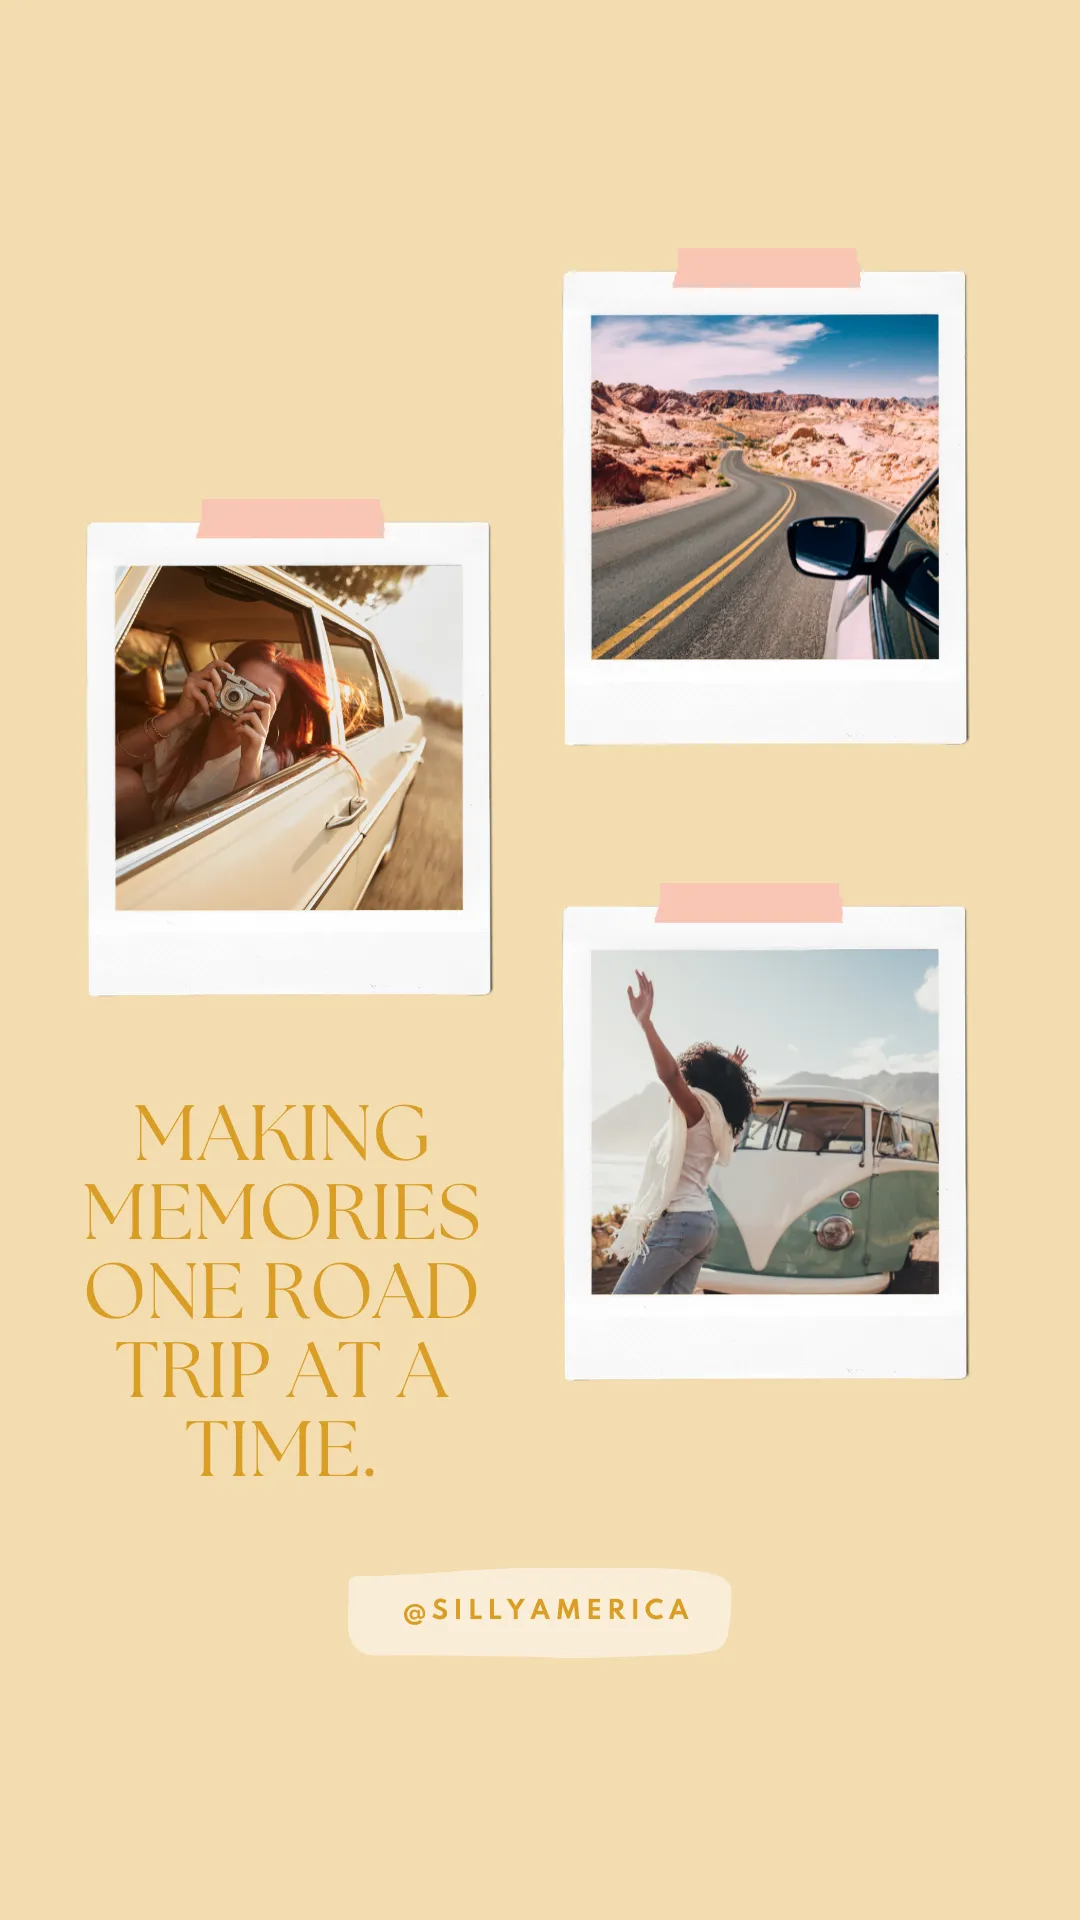 Making memories one road trip at a time. - Road Trip Captions for Instagram